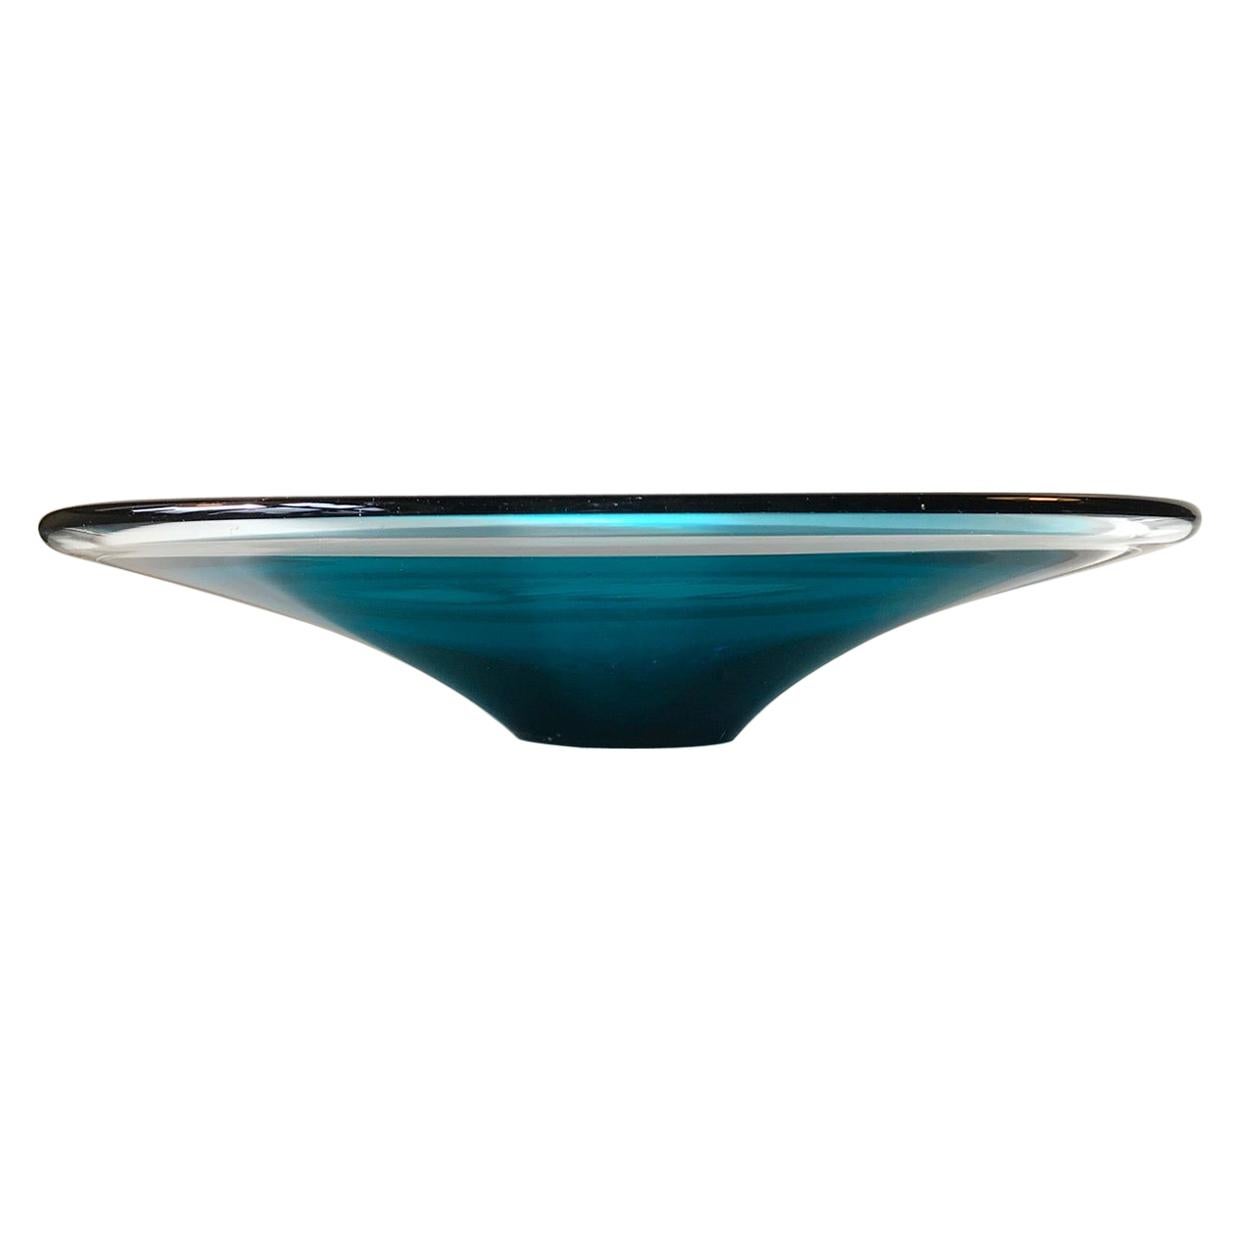 Modernist Art Glass Dish by Willy Johansson for Hadeland, Norway, 1960s